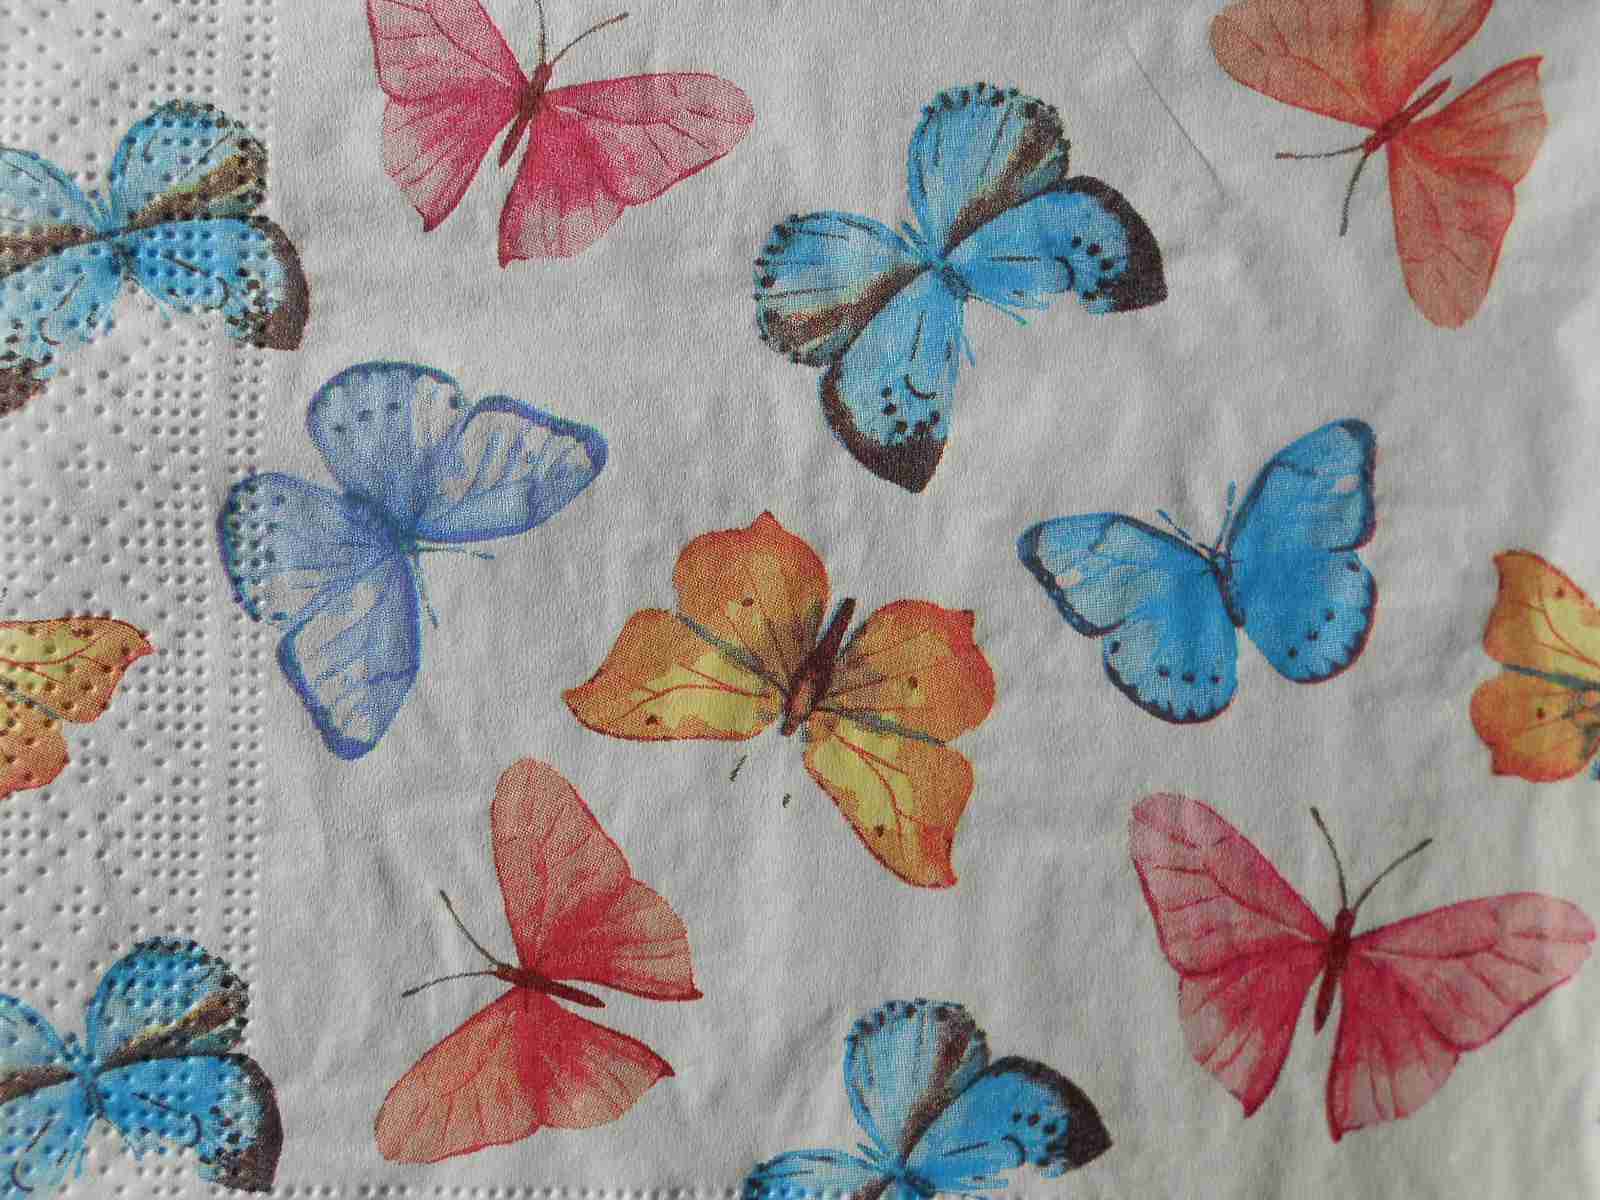 Party Napkins Darling Butterflies Decoupage Napkins Paper Napkins for Decoupage Romantic Napkins Butterfly Napkins